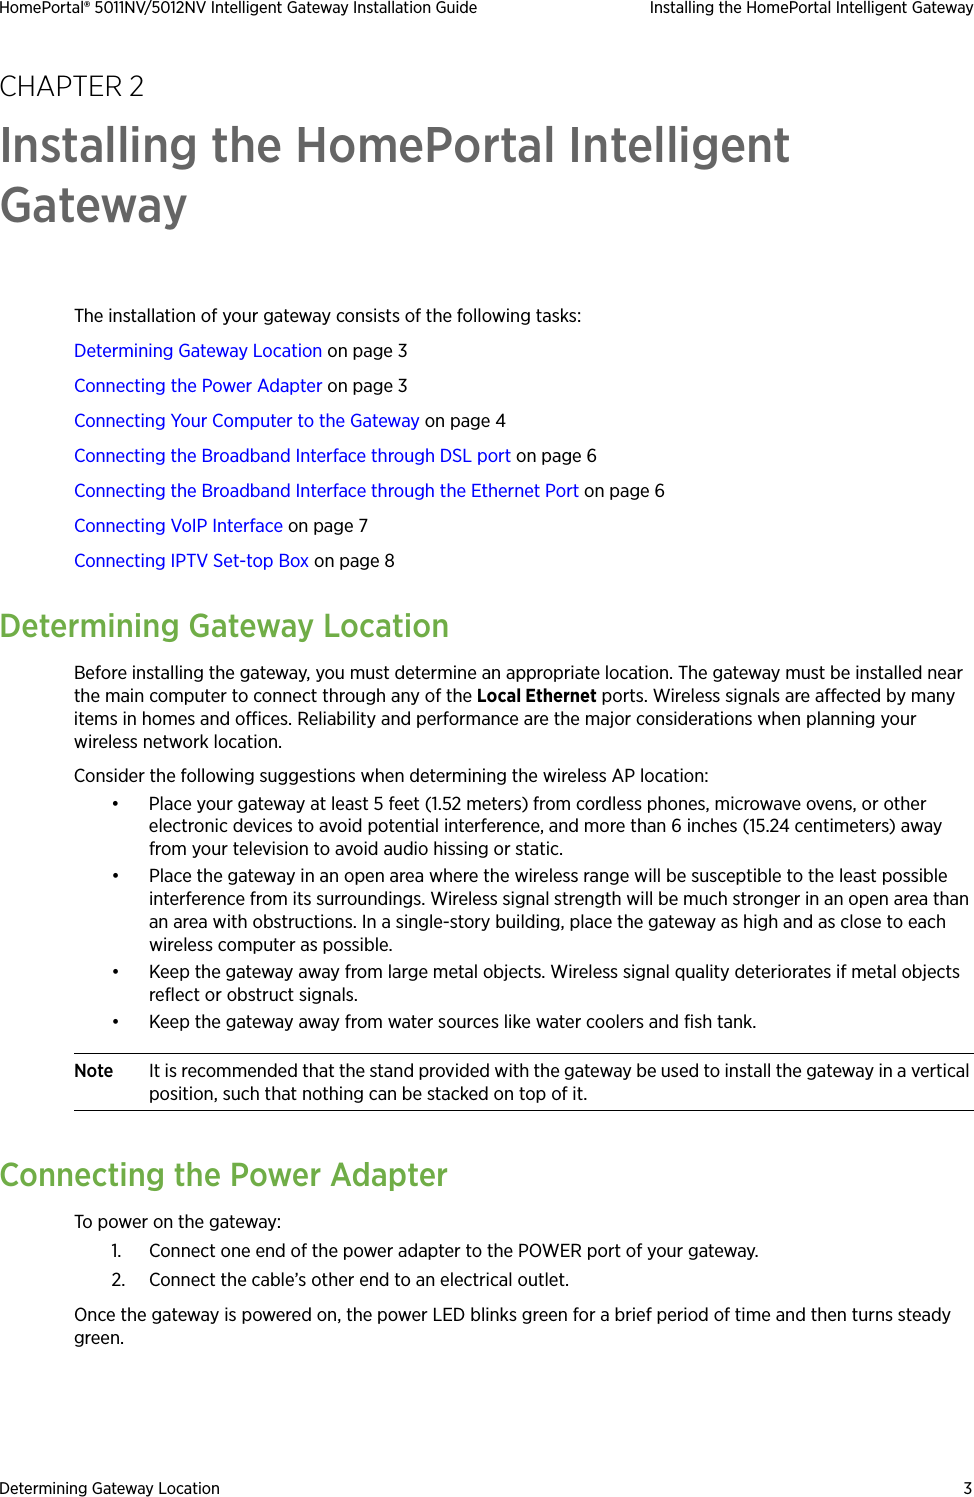 Determining Gateway Location 3HomePortal® 5011NV/5012NV Intelligent Gateway Installation Guide Installing the HomePortal Intelligent GatewayCHAPTER 2Installing the HomePortal Intelligent GatewayThe installation of your gateway consists of the following tasks:Determining Gateway Location on page 3Connecting the Power Adapter on page 3Connecting Your Computer to the Gateway on page 4Connecting the Broadband Interface through DSL port on page 6Connecting the Broadband Interface through the Ethernet Port on page 6Connecting VoIP Interface on page 7Connecting IPTV Set-top Box on page 8Determining Gateway LocationBefore installing the gateway, you must determine an appropriate location. The gateway must be installed near the main computer to connect through any of the Local Ethernet ports. Wireless signals are affected by many items in homes and offices. Reliability and performance are the major considerations when planning your wireless network location. Consider the following suggestions when determining the wireless AP location:• Place your gateway at least 5 feet (1.52 meters) from cordless phones, microwave ovens, or other electronic devices to avoid potential interference, and more than 6 inches (15.24 centimeters) away from your television to avoid audio hissing or static.• Place the gateway in an open area where the wireless range will be susceptible to the least possible interference from its surroundings. Wireless signal strength will be much stronger in an open area than an area with obstructions. In a single-story building, place the gateway as high and as close to each wireless computer as possible.• Keep the gateway away from large metal objects. Wireless signal quality deteriorates if metal objects reflect or obstruct signals.• Keep the gateway away from water sources like water coolers and fish tank.Note It is recommended that the stand provided with the gateway be used to install the gateway in a vertical position, such that nothing can be stacked on top of it. Connecting the Power AdapterTo power on the gateway:1. Connect one end of the power adapter to the POWER port of your gateway.2. Connect the cable’s other end to an electrical outlet. Once the gateway is powered on, the power LED blinks green for a brief period of time and then turns steady green.